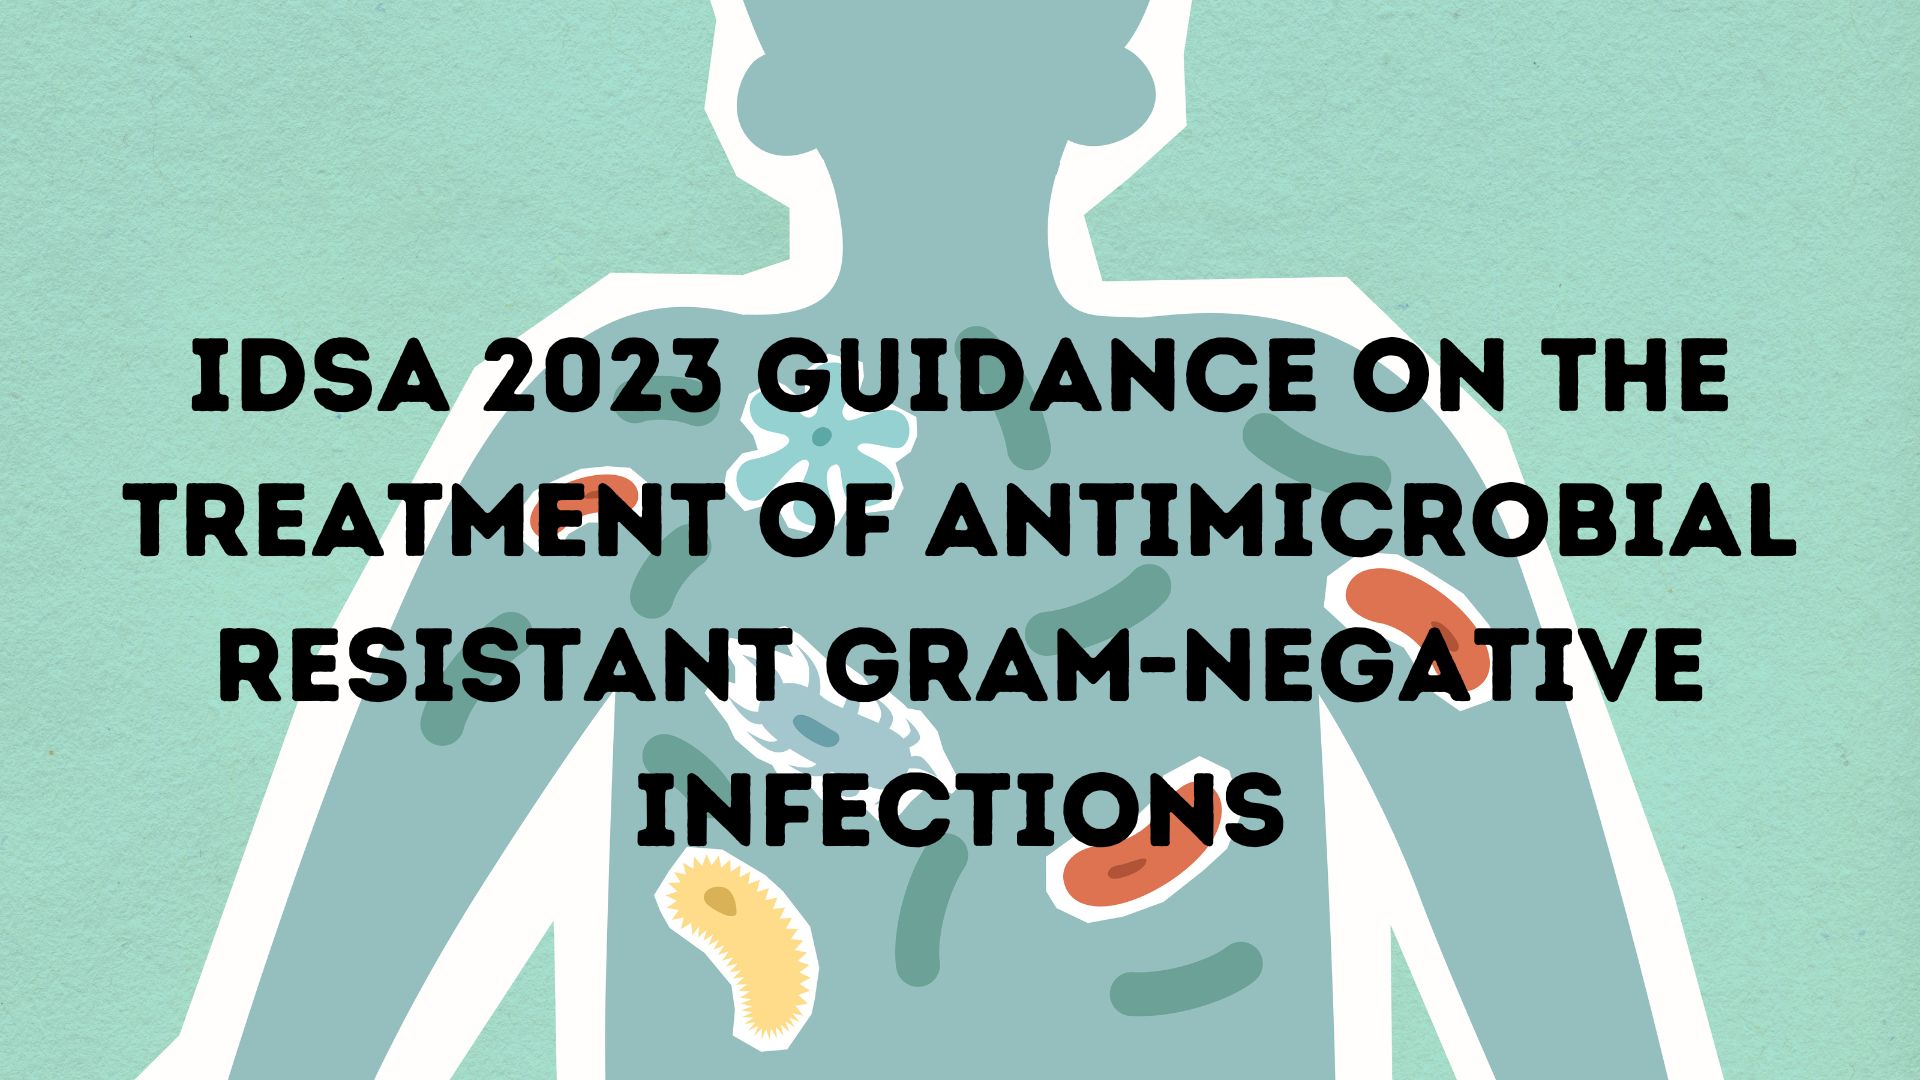 IDSA 2023 Guidance on the Treatment of Antimicrobial Resistant Gram-Negative Infections